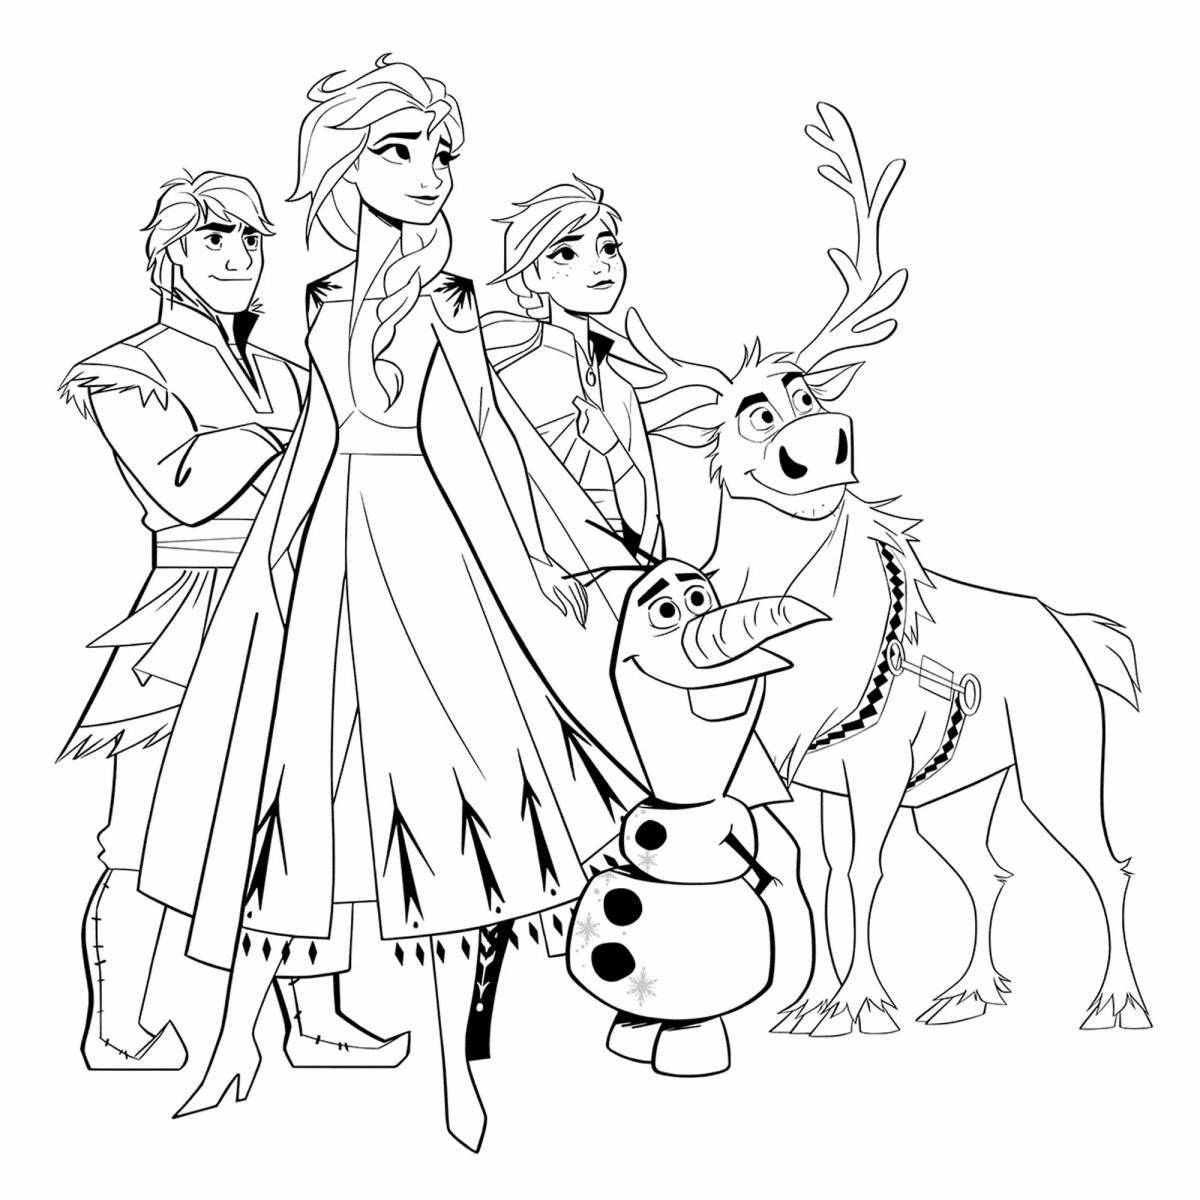 Frozen coloring game colorful